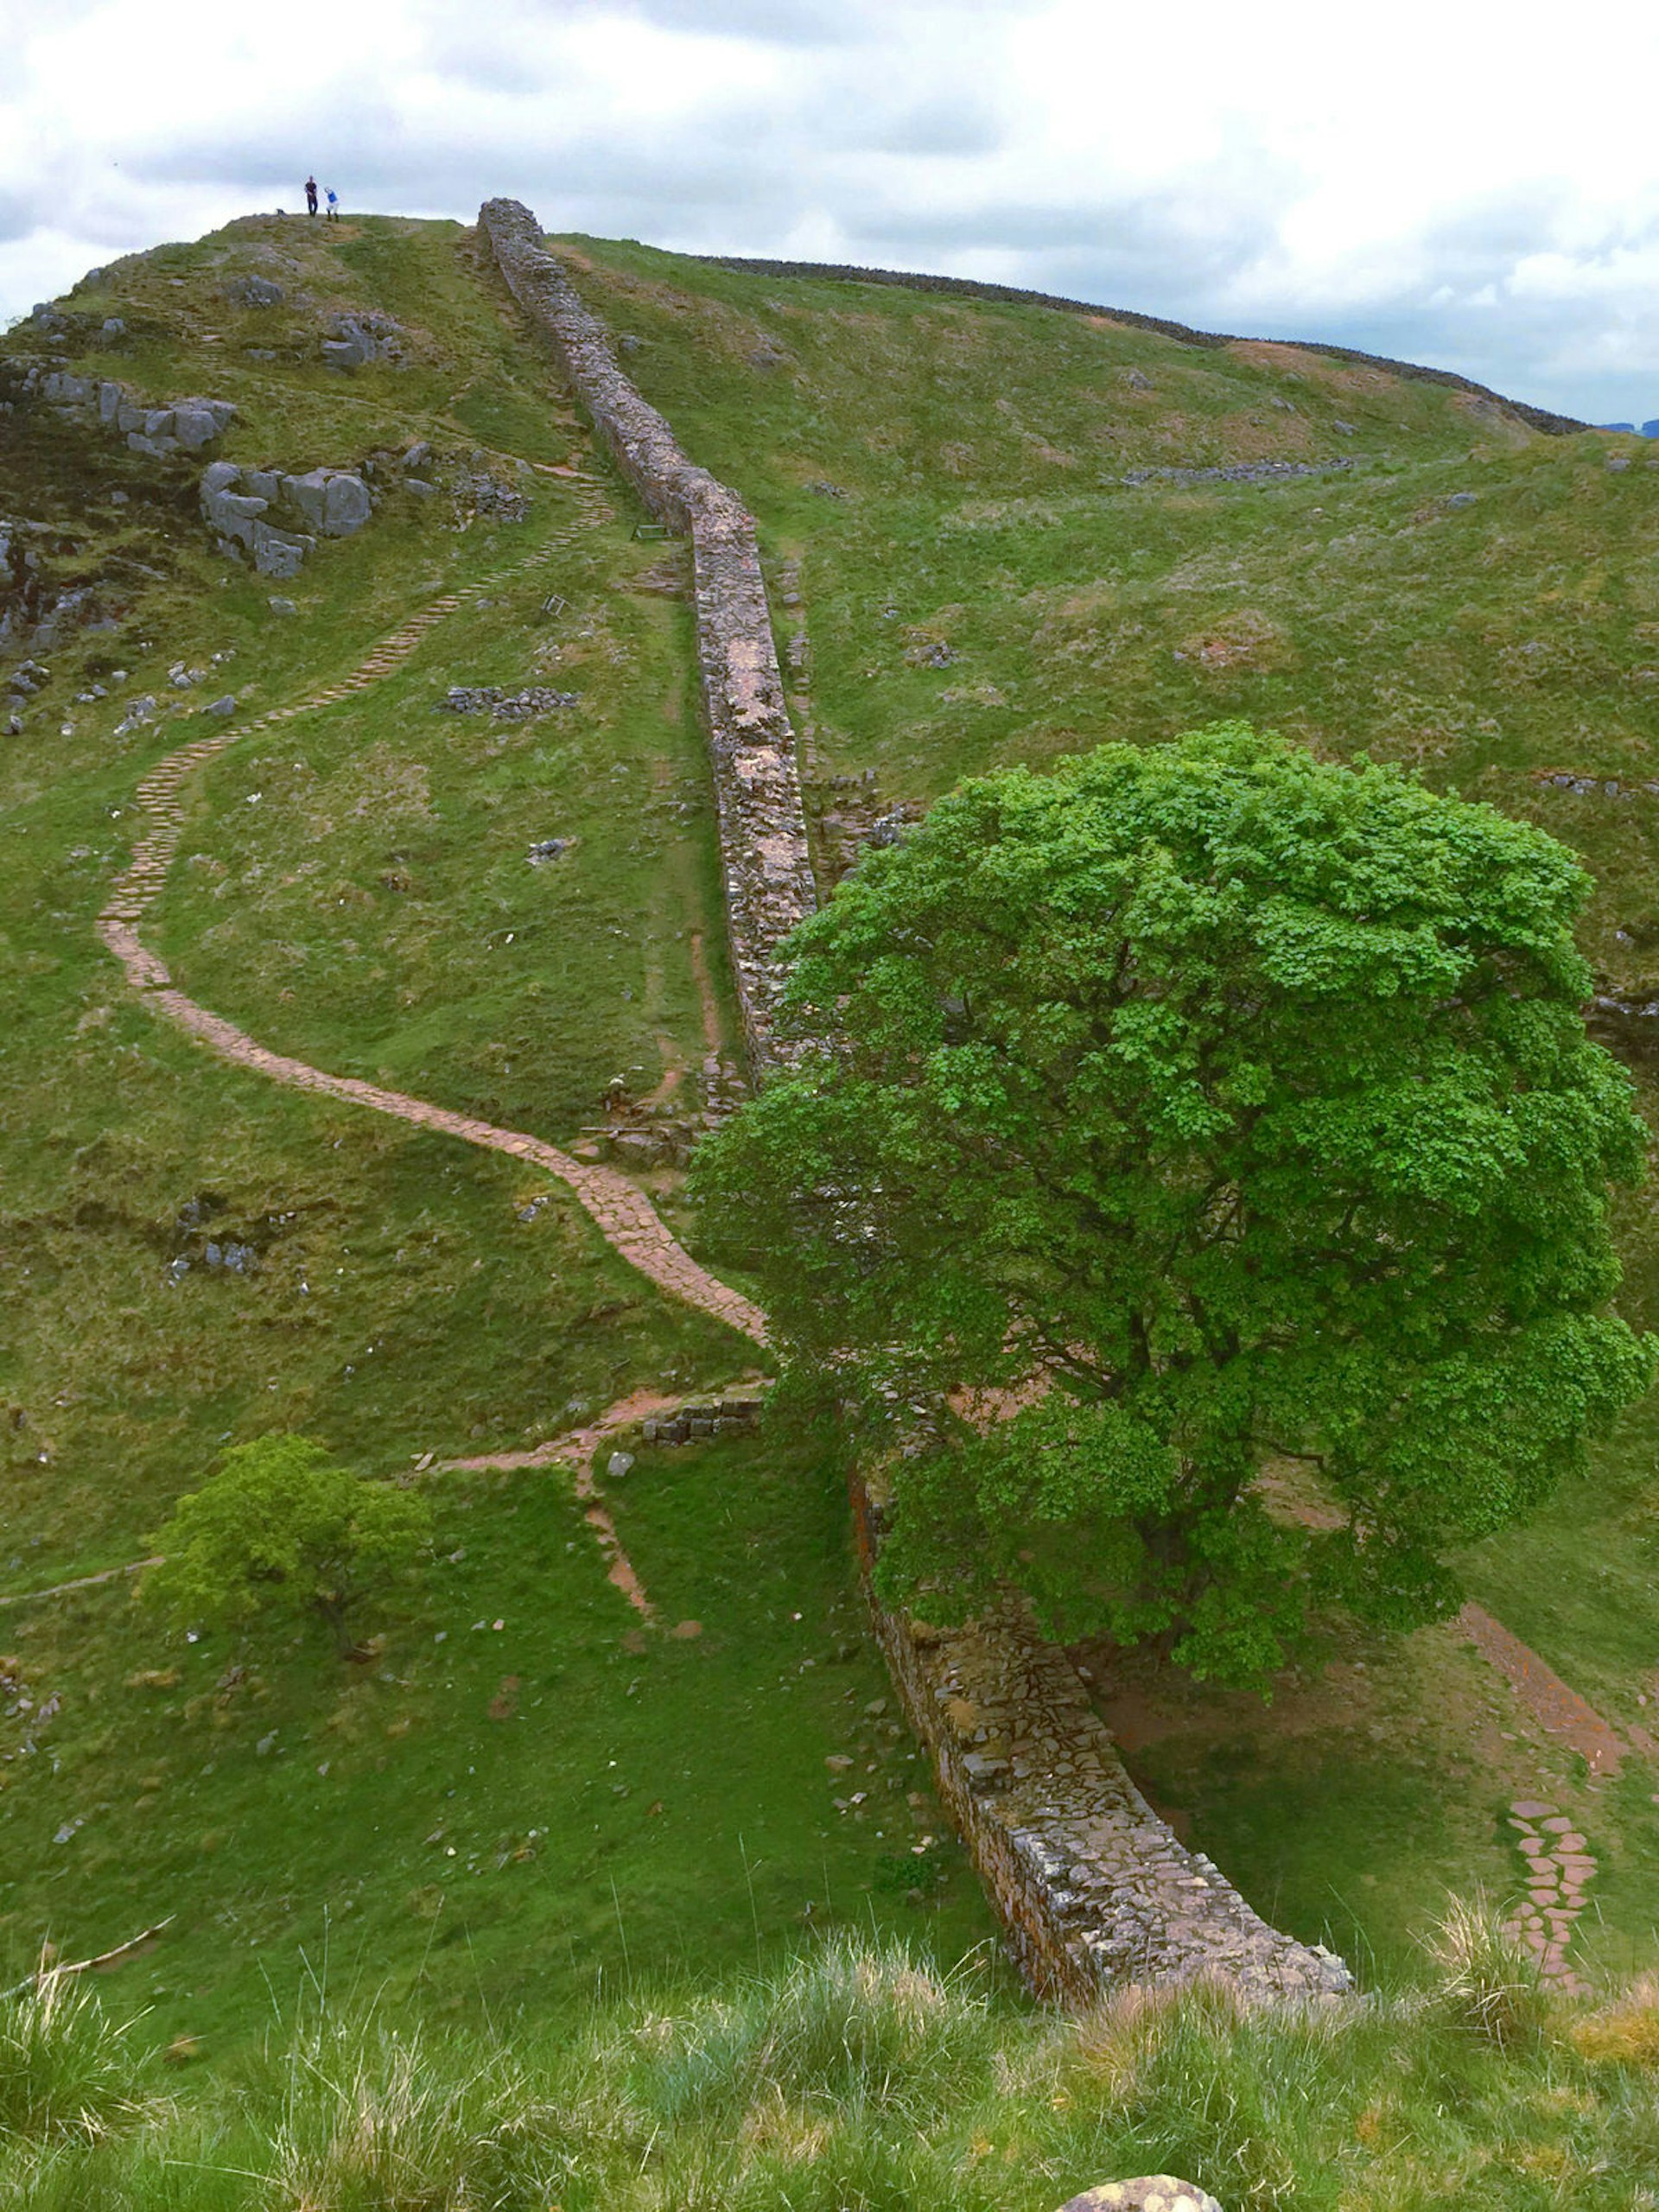 Looking down on a sycamore tree and a hilly part of the wall